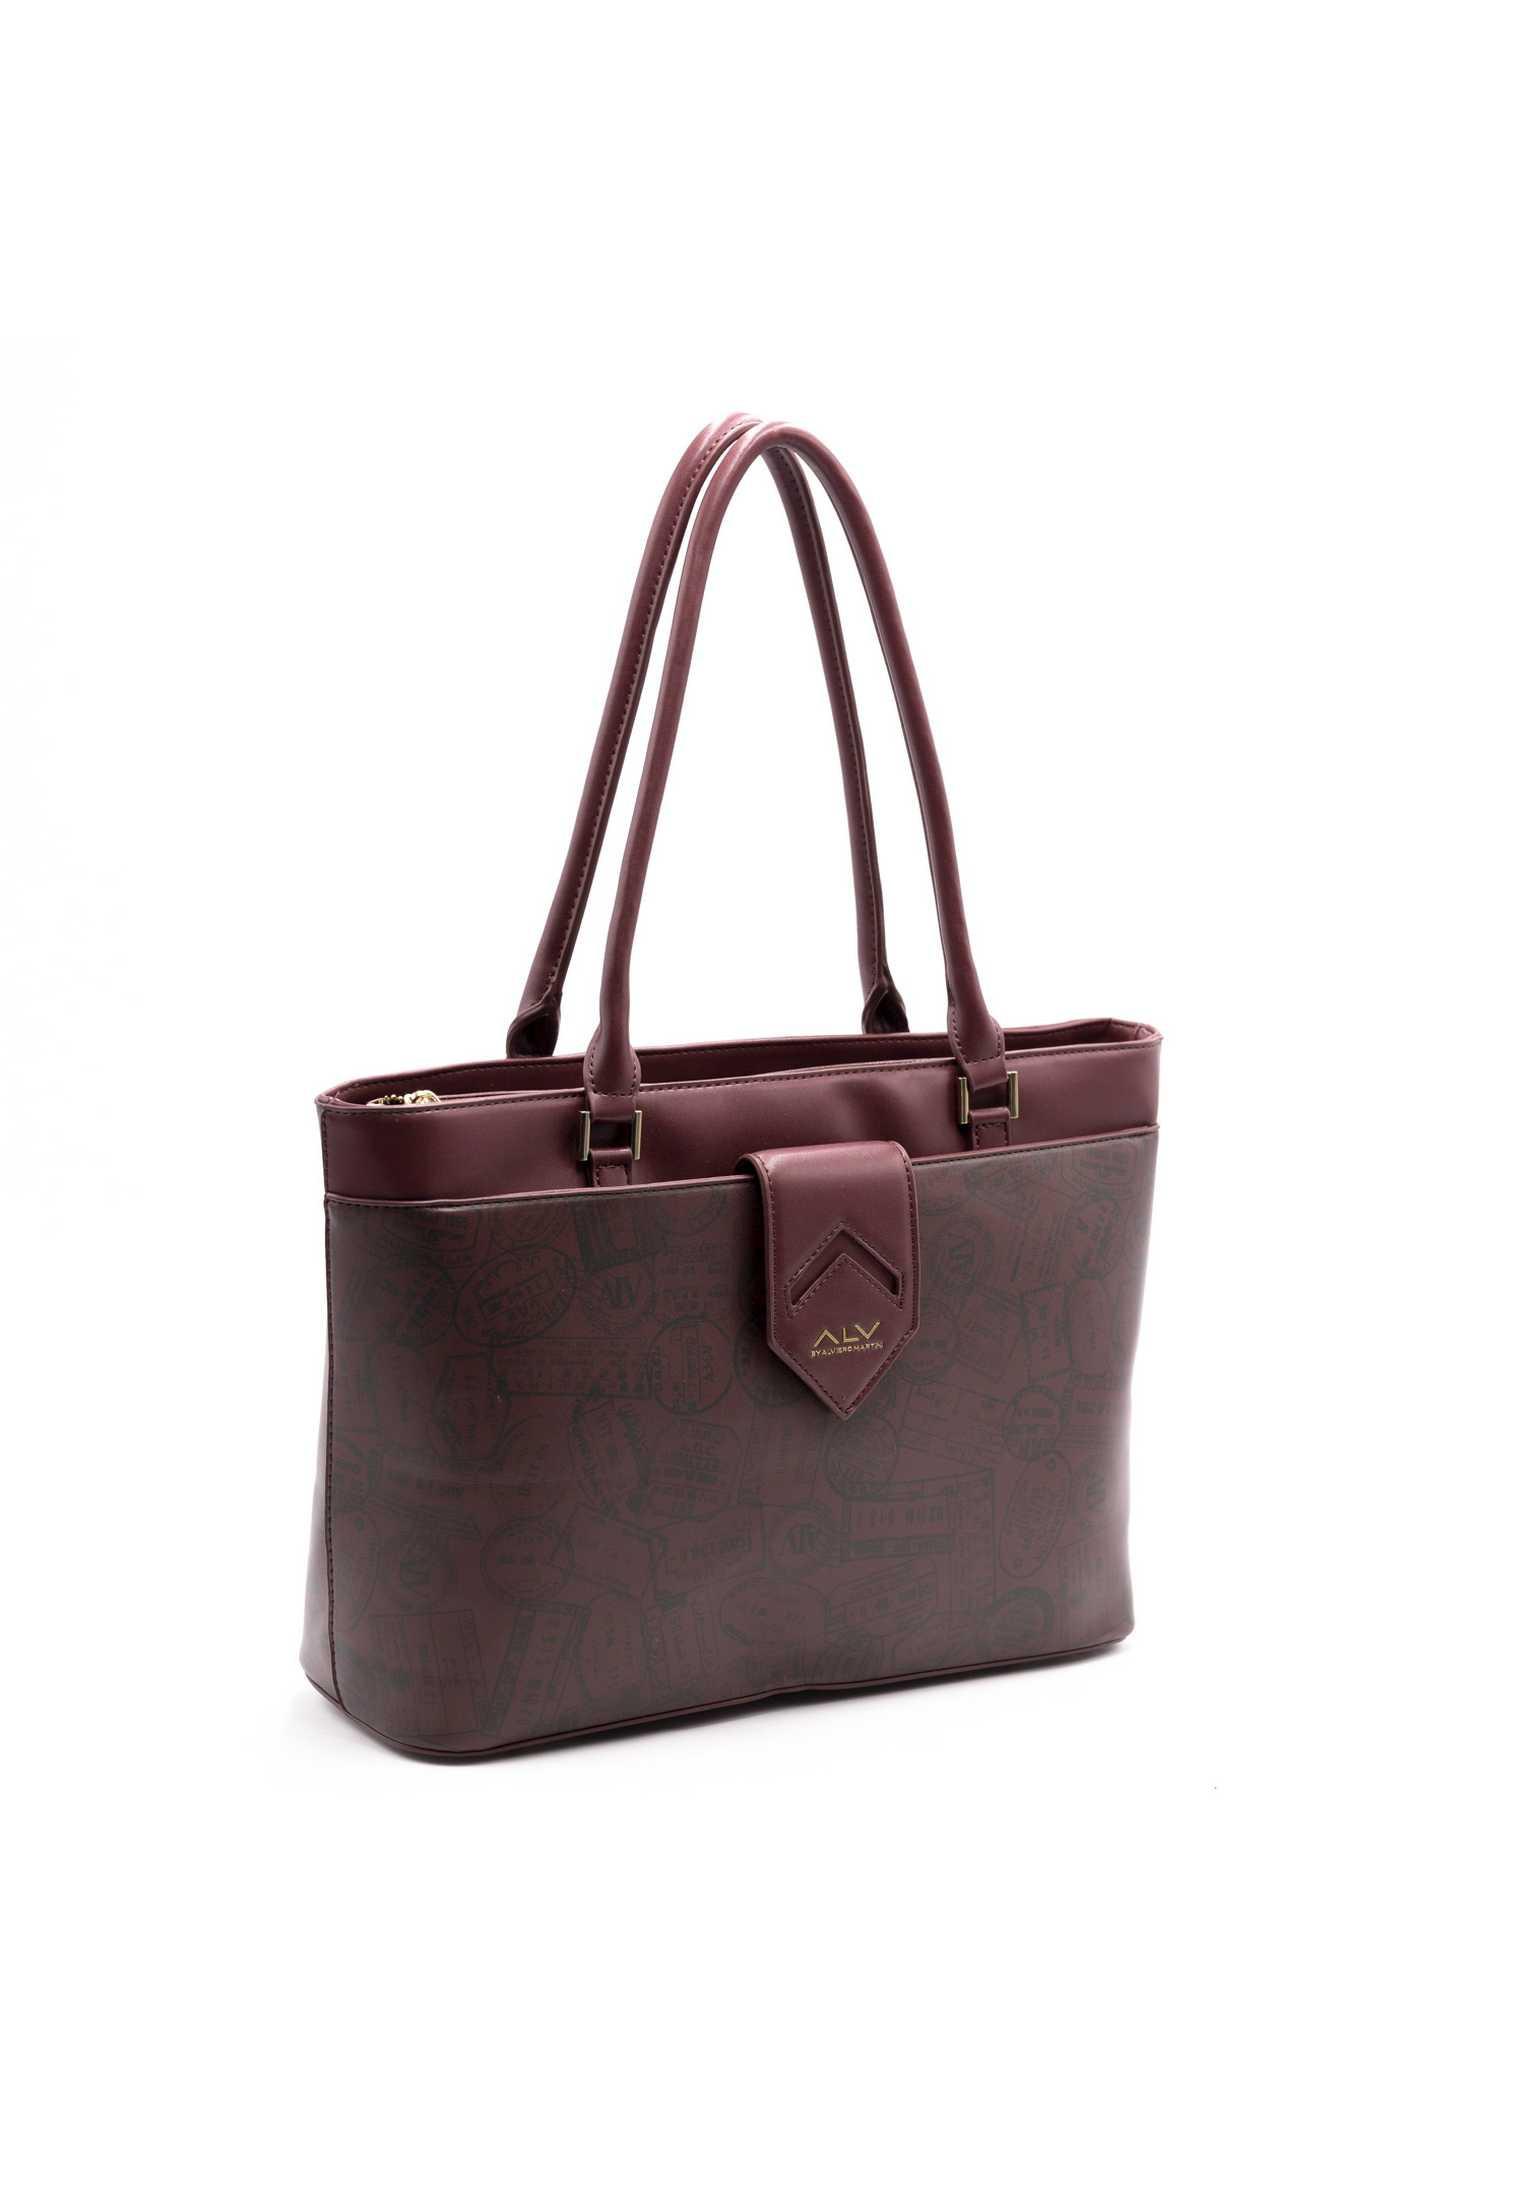 ALV by Alviero Martini  Shopping Bag With Flap Collection Sergent  Bag 